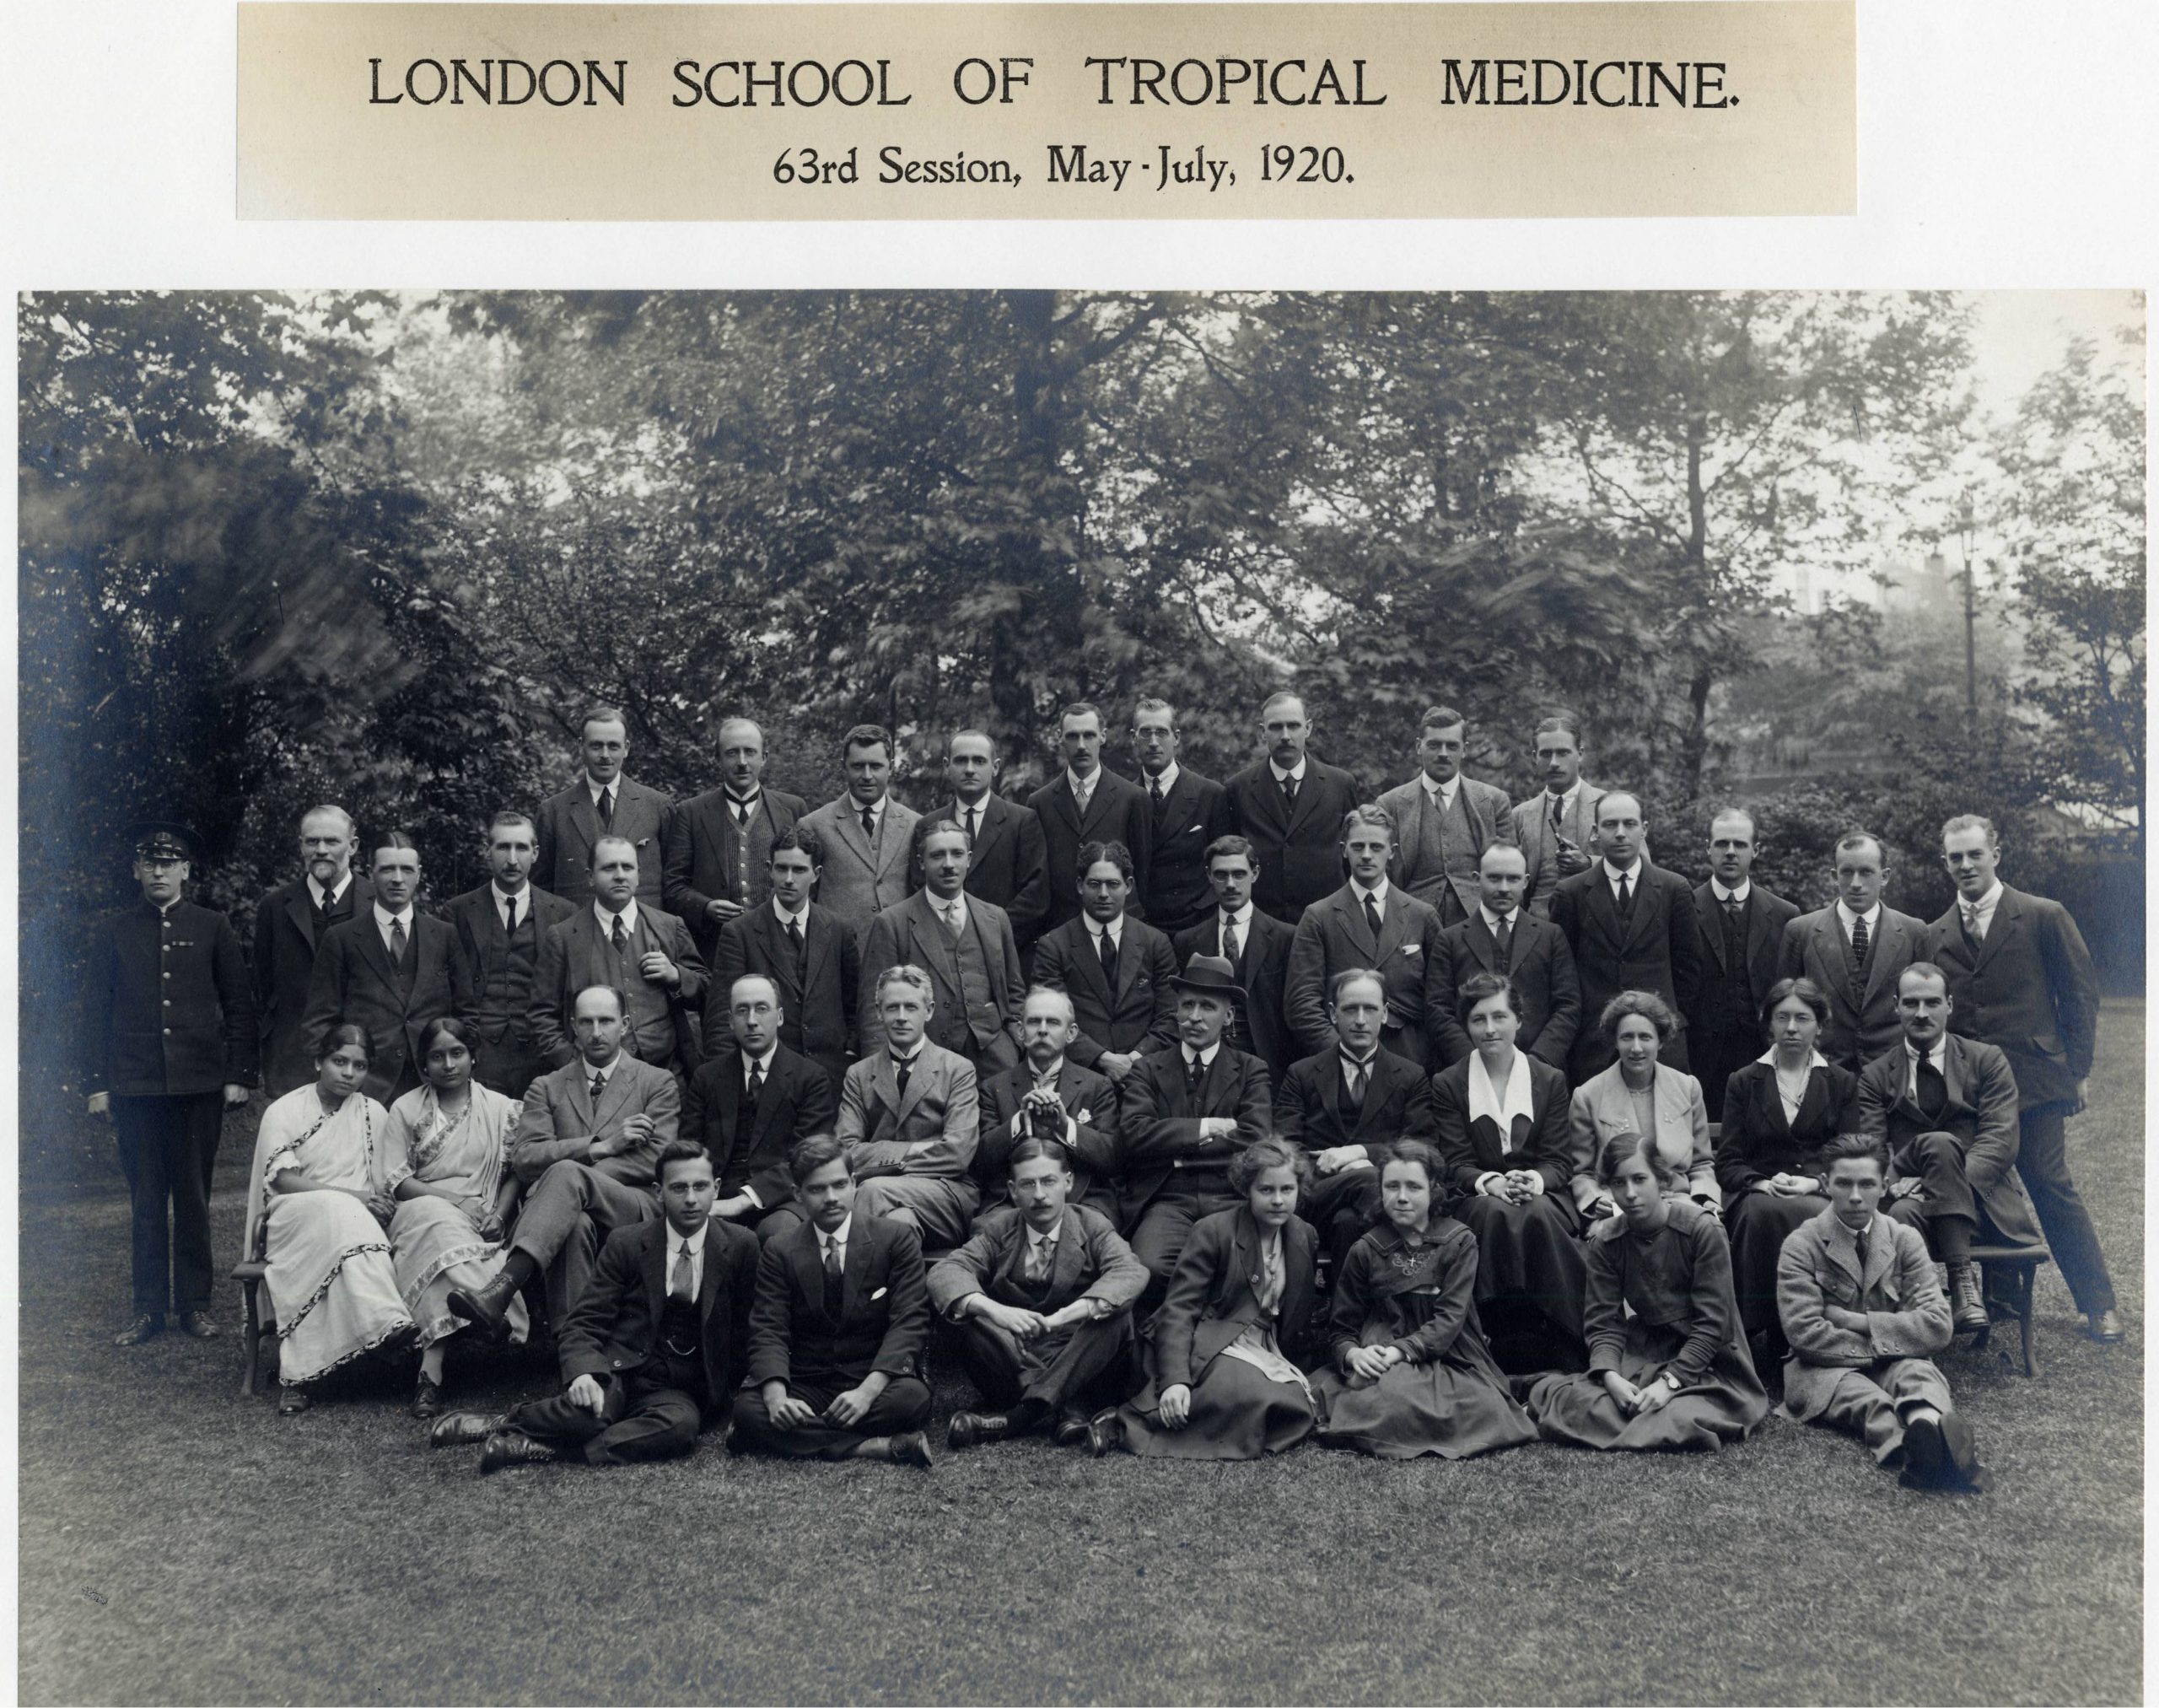 Members of the Diploma in Tropical Medicine and Hygiene course,